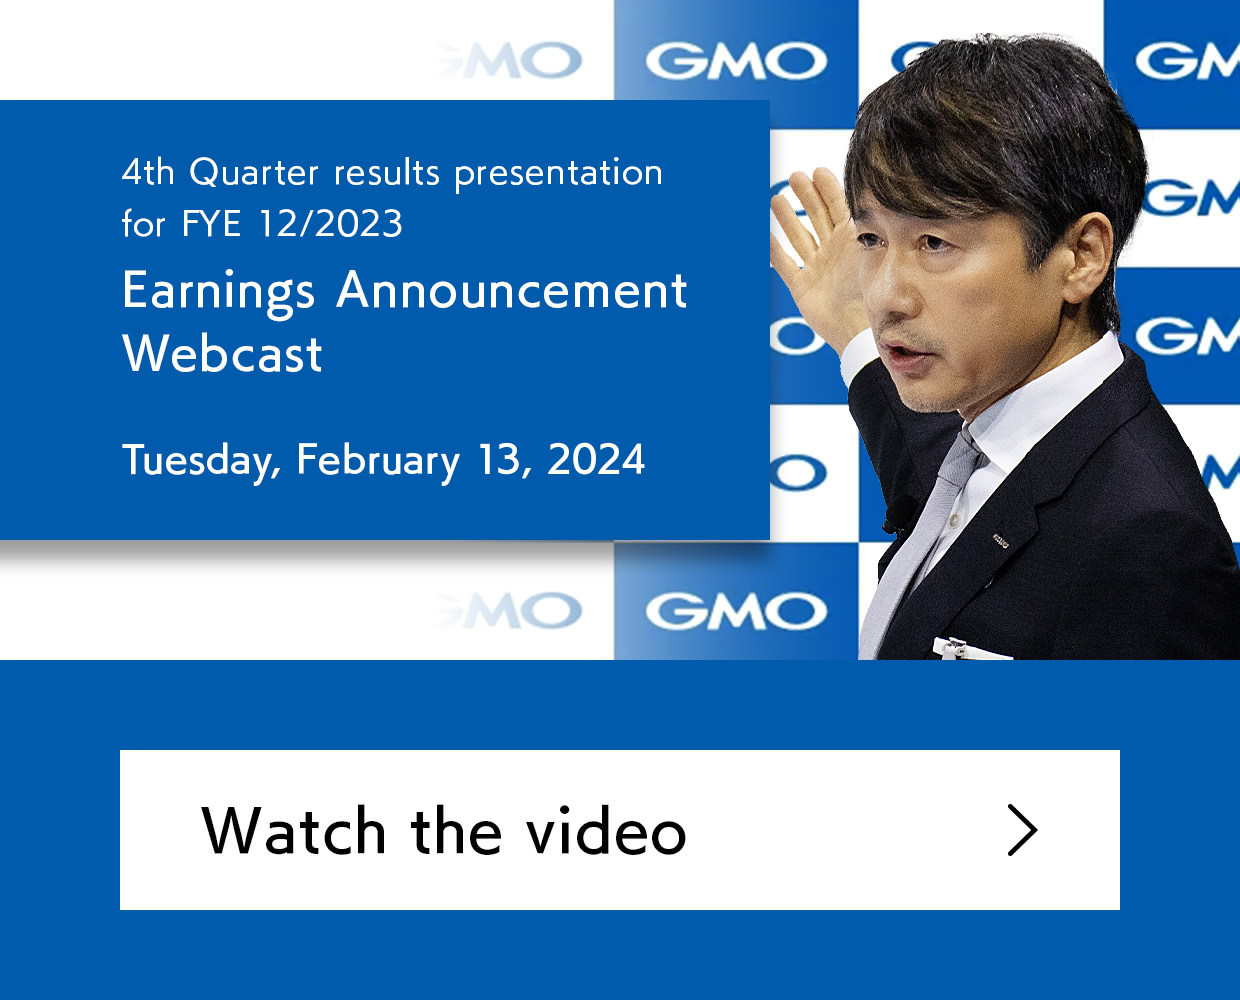 4th Quarter, Fiscal Year 2023 Earnings Announcement Webcast